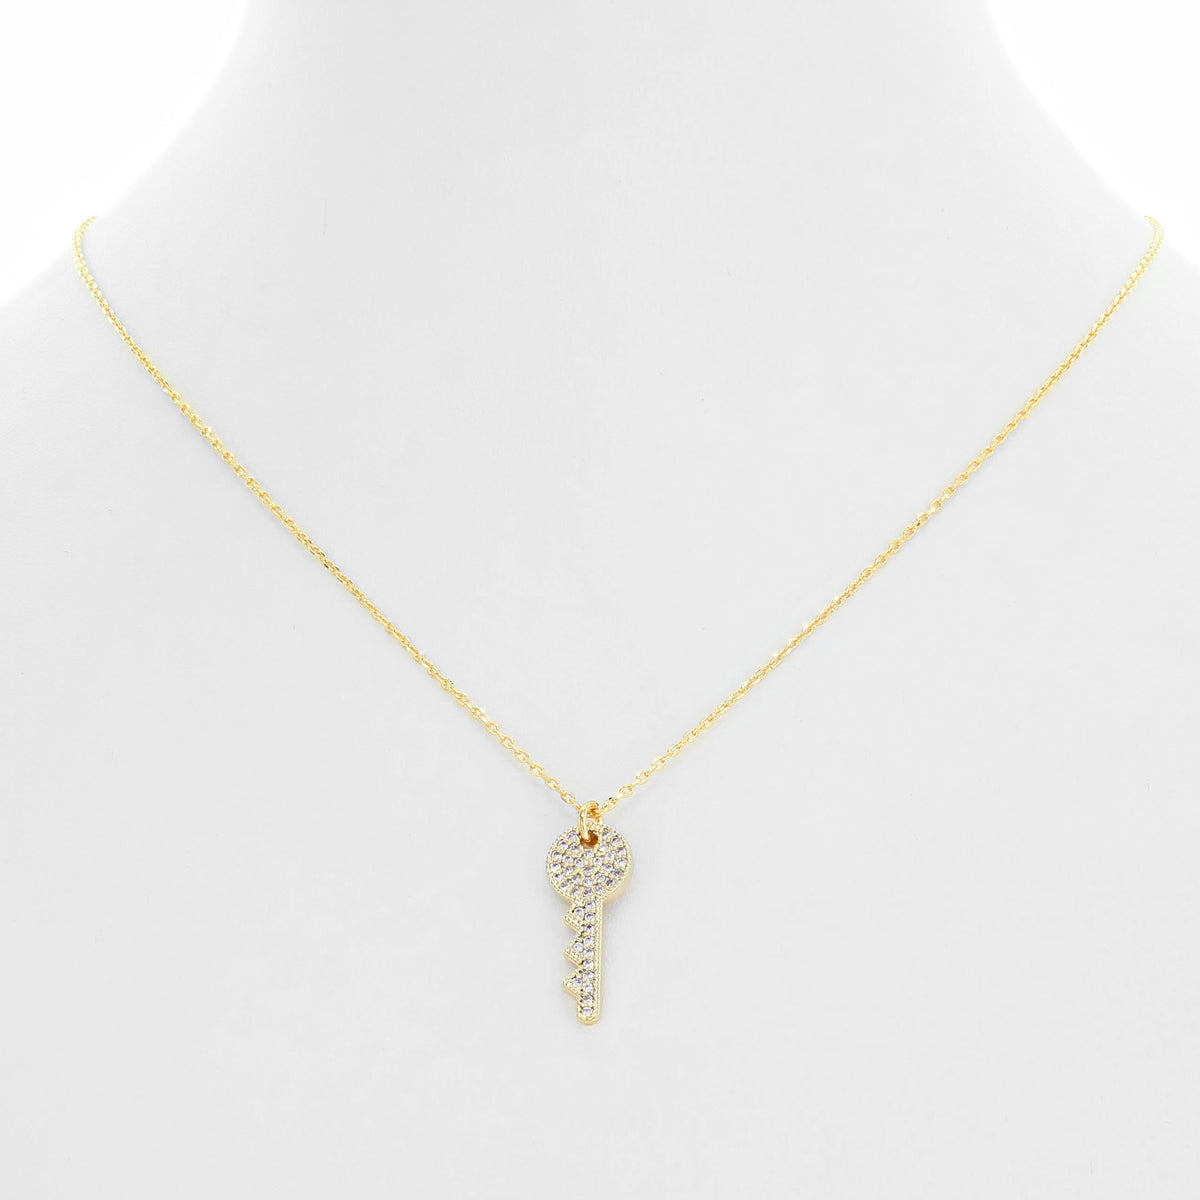 GOLD KEY CHAIN NECKLACE